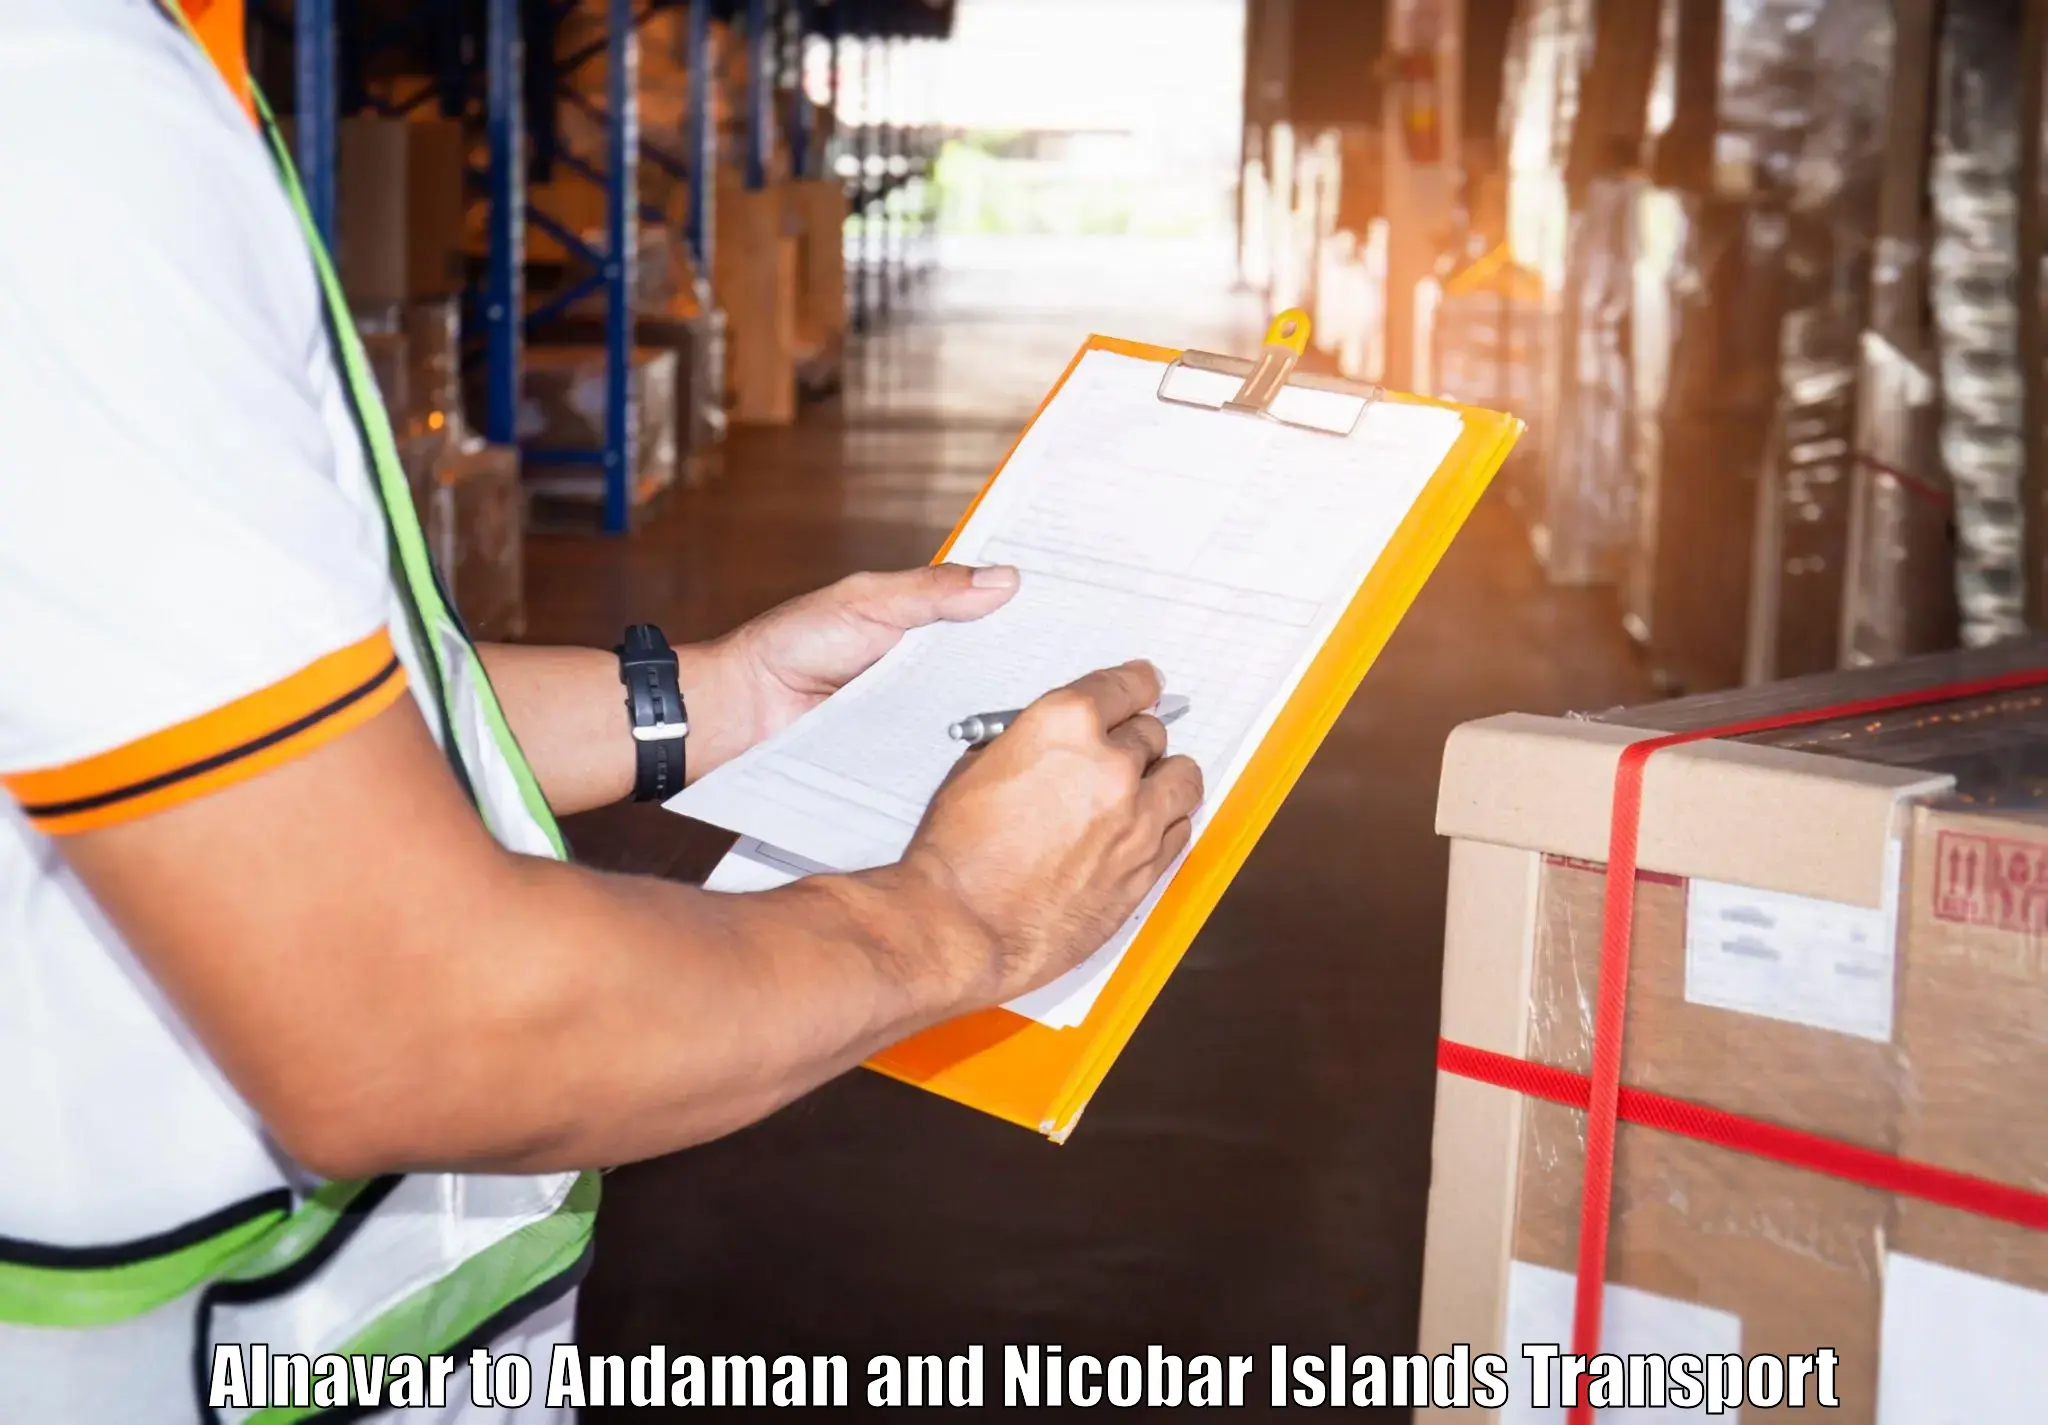 Goods delivery service Alnavar to South Andaman